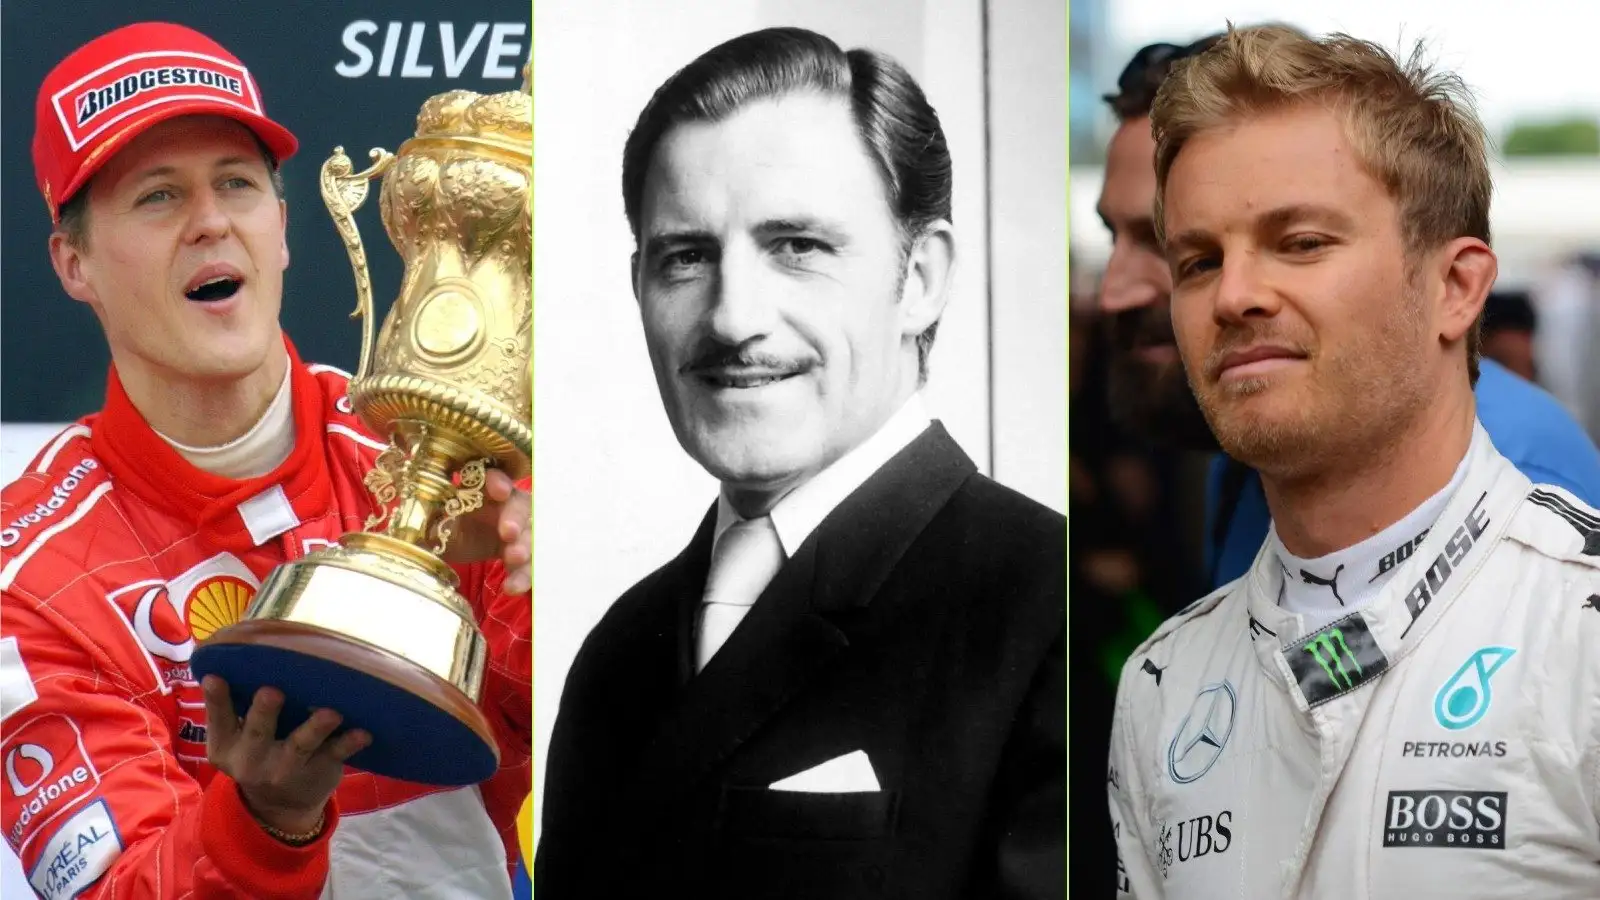 A side-by-side shot of Michael Schumacher, Graham Hill and Nico Rosberg